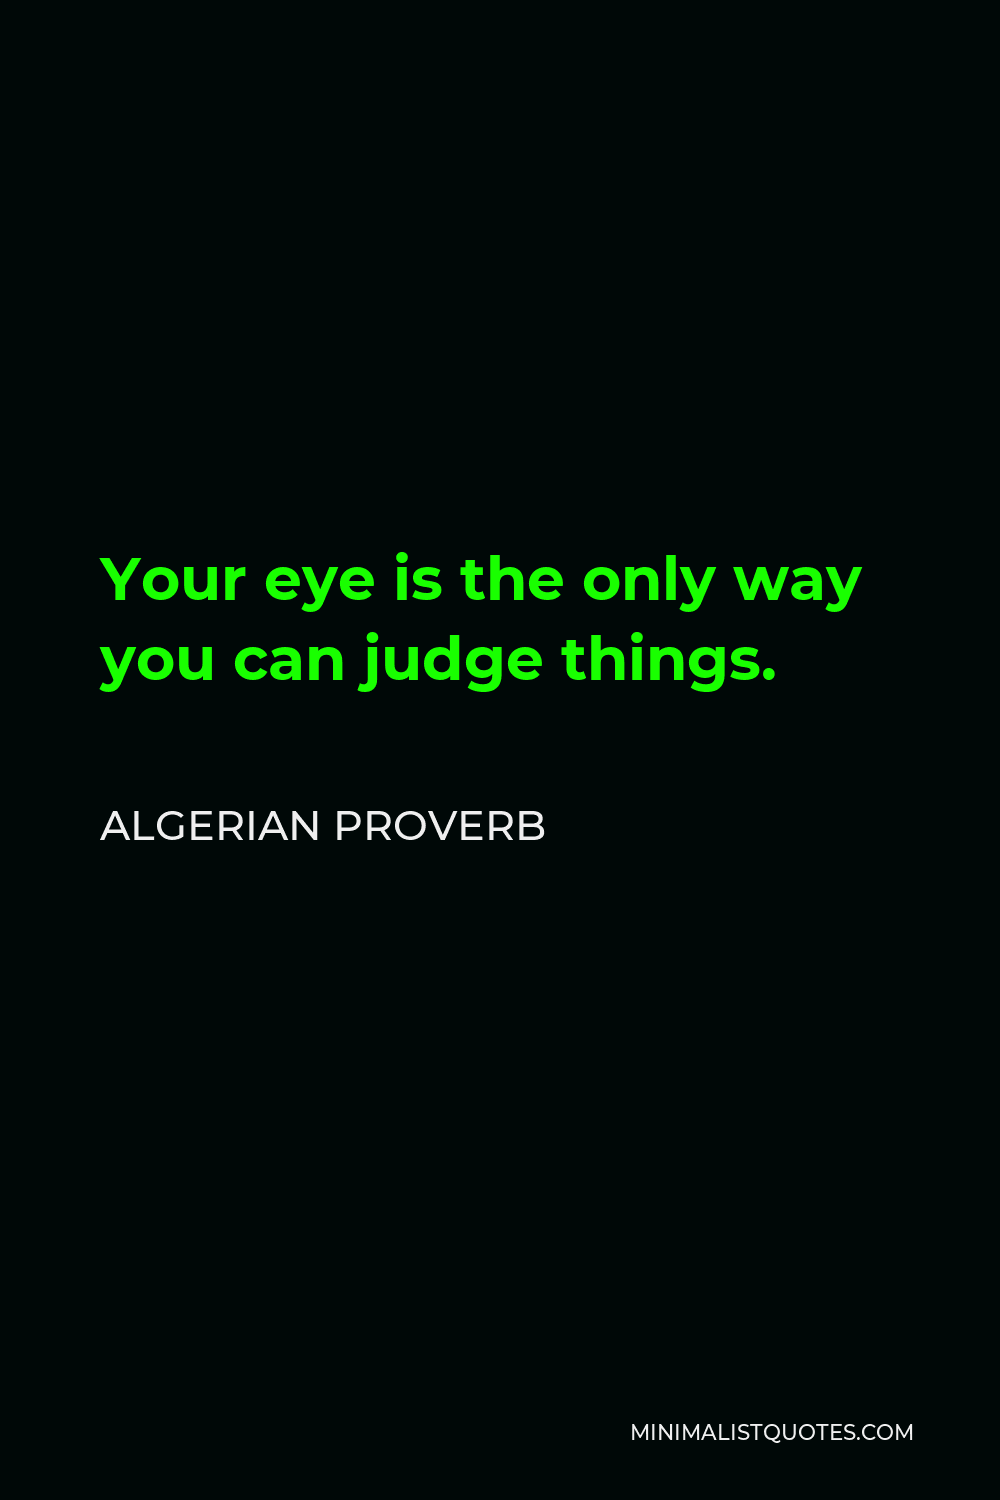 Algerian Proverb Quote - Your eye is the only way you can judge things.